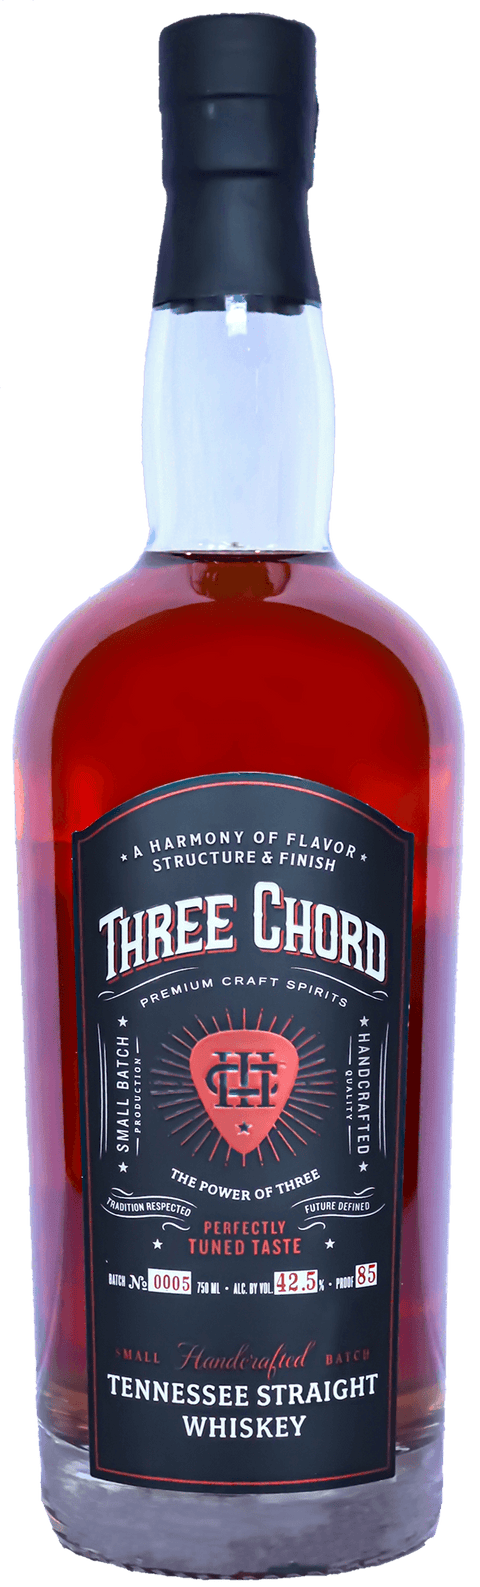 Three Chord Small Batch Handcrafted Tennessee Straight Whiskey 750 ml